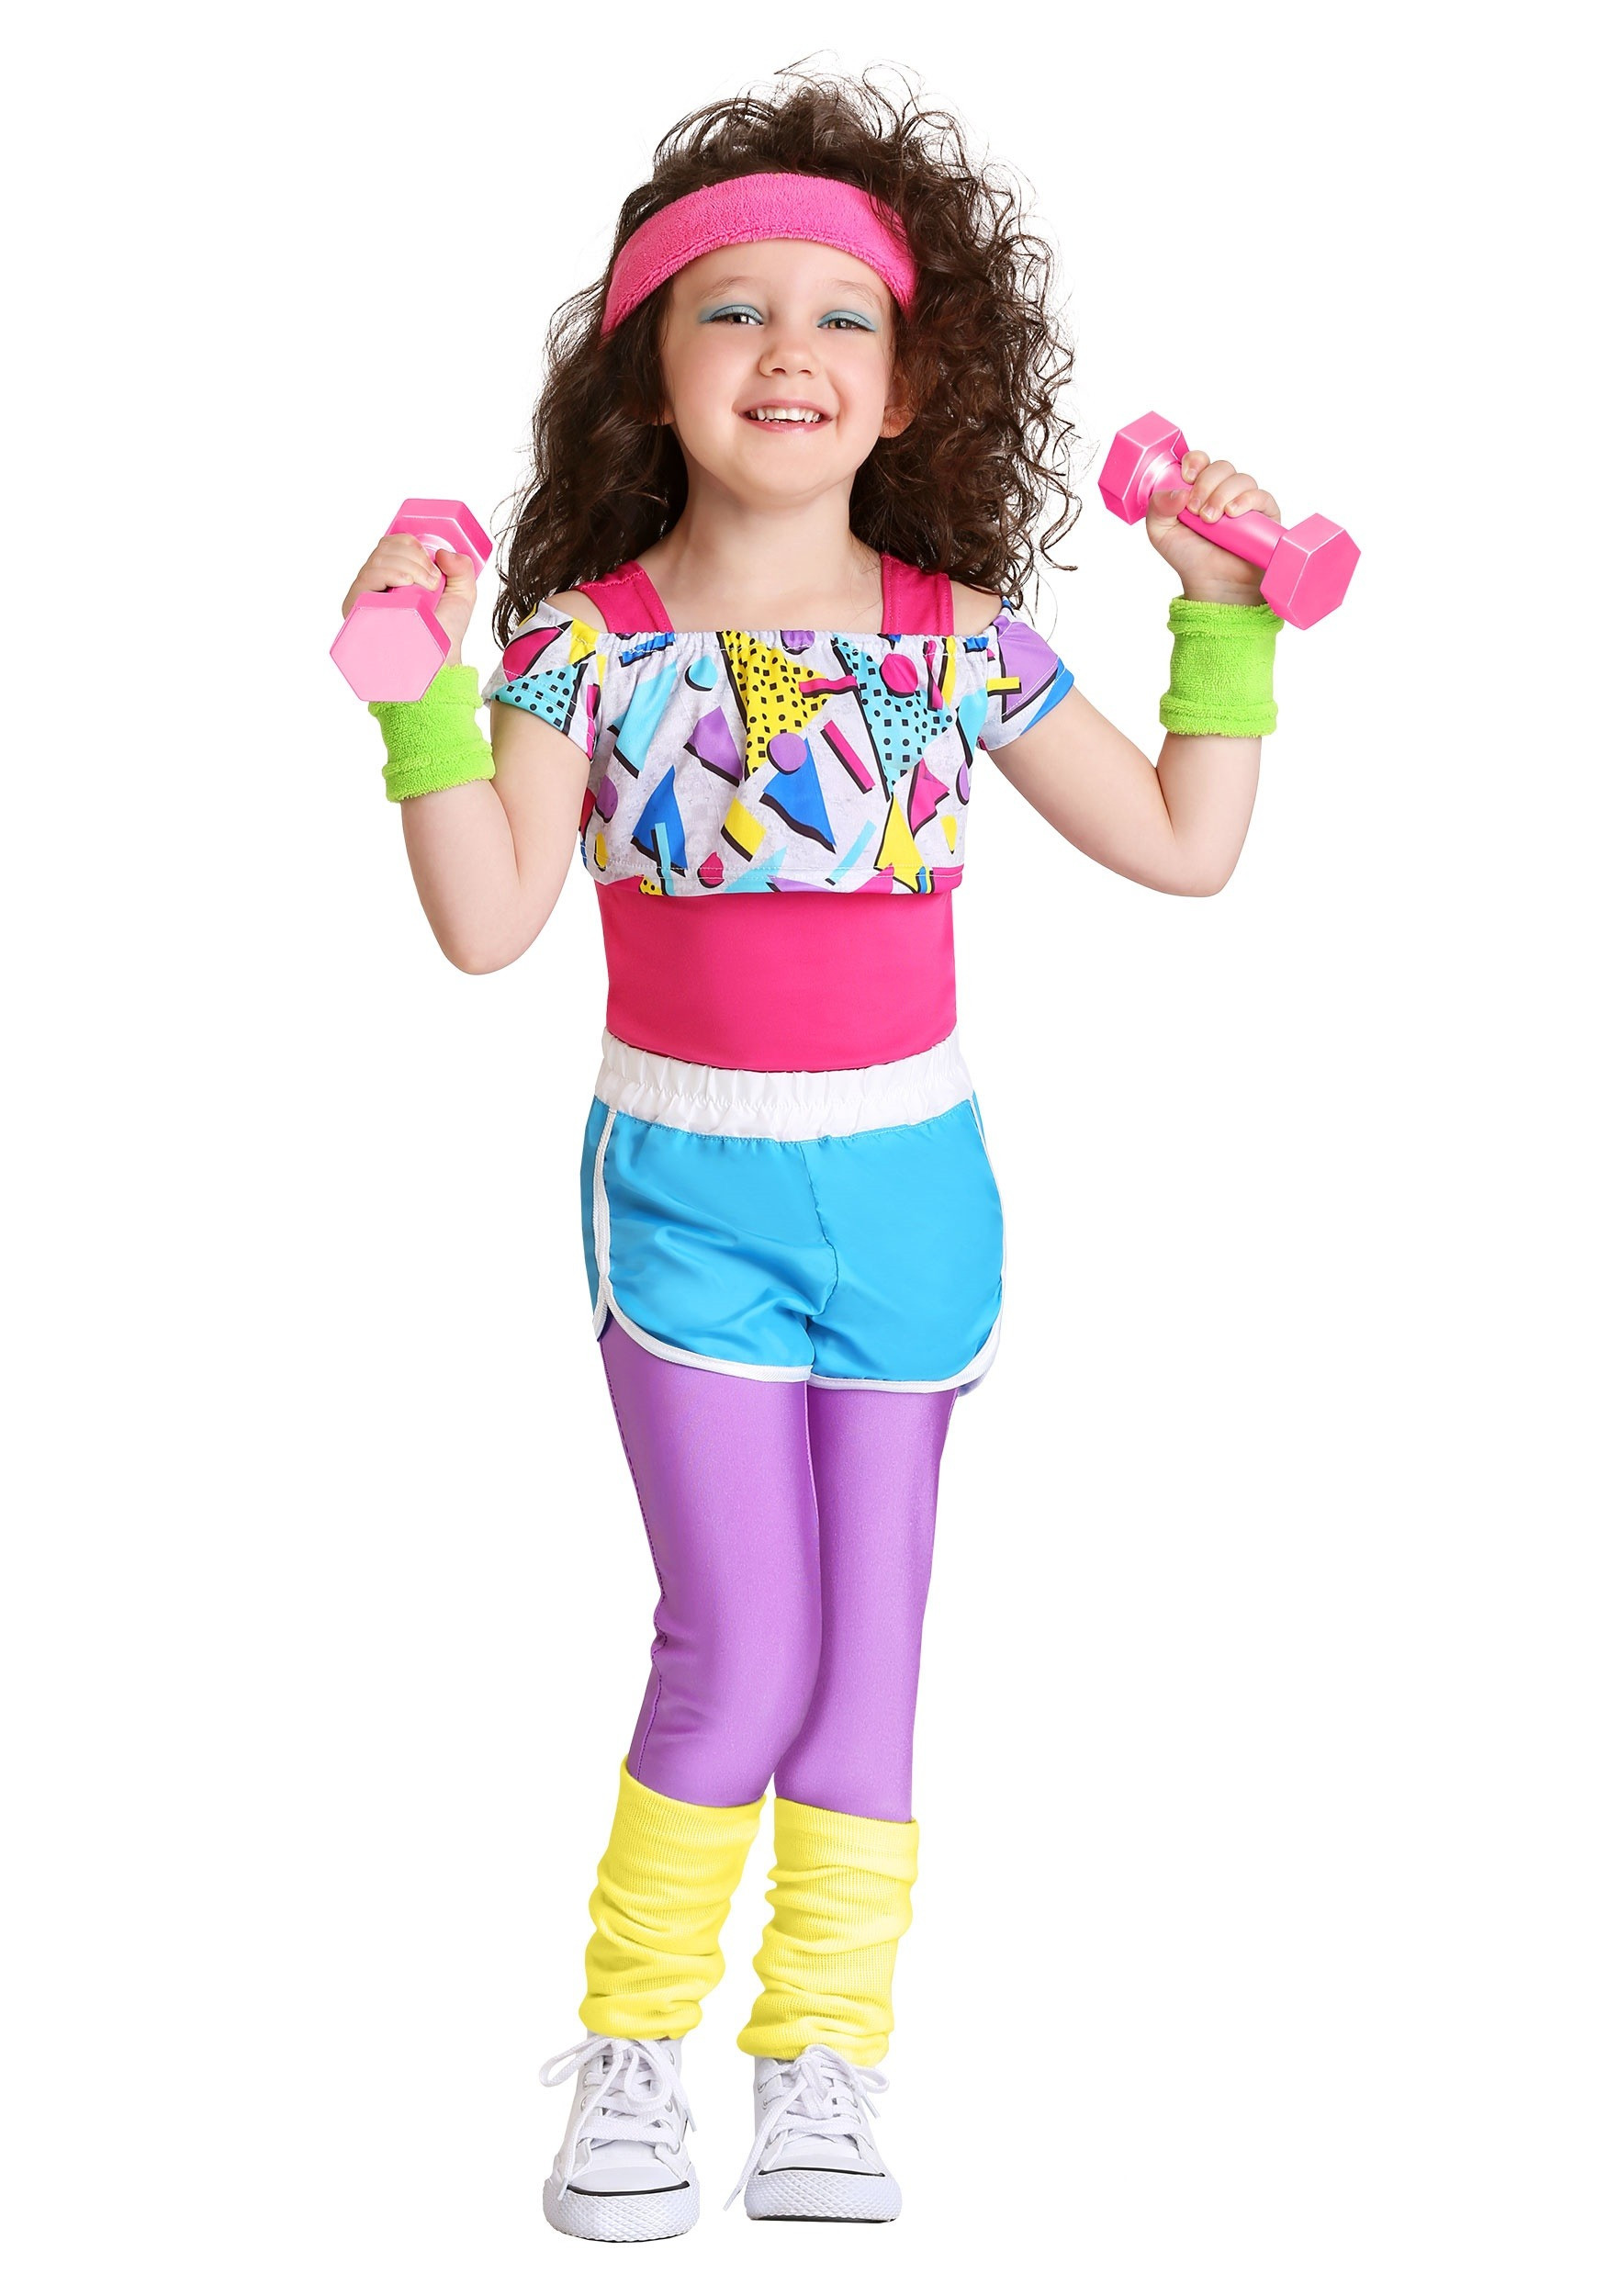 24 Of the Best Ideas for 80s Fashion for Kids - Home, Family, Style and ...